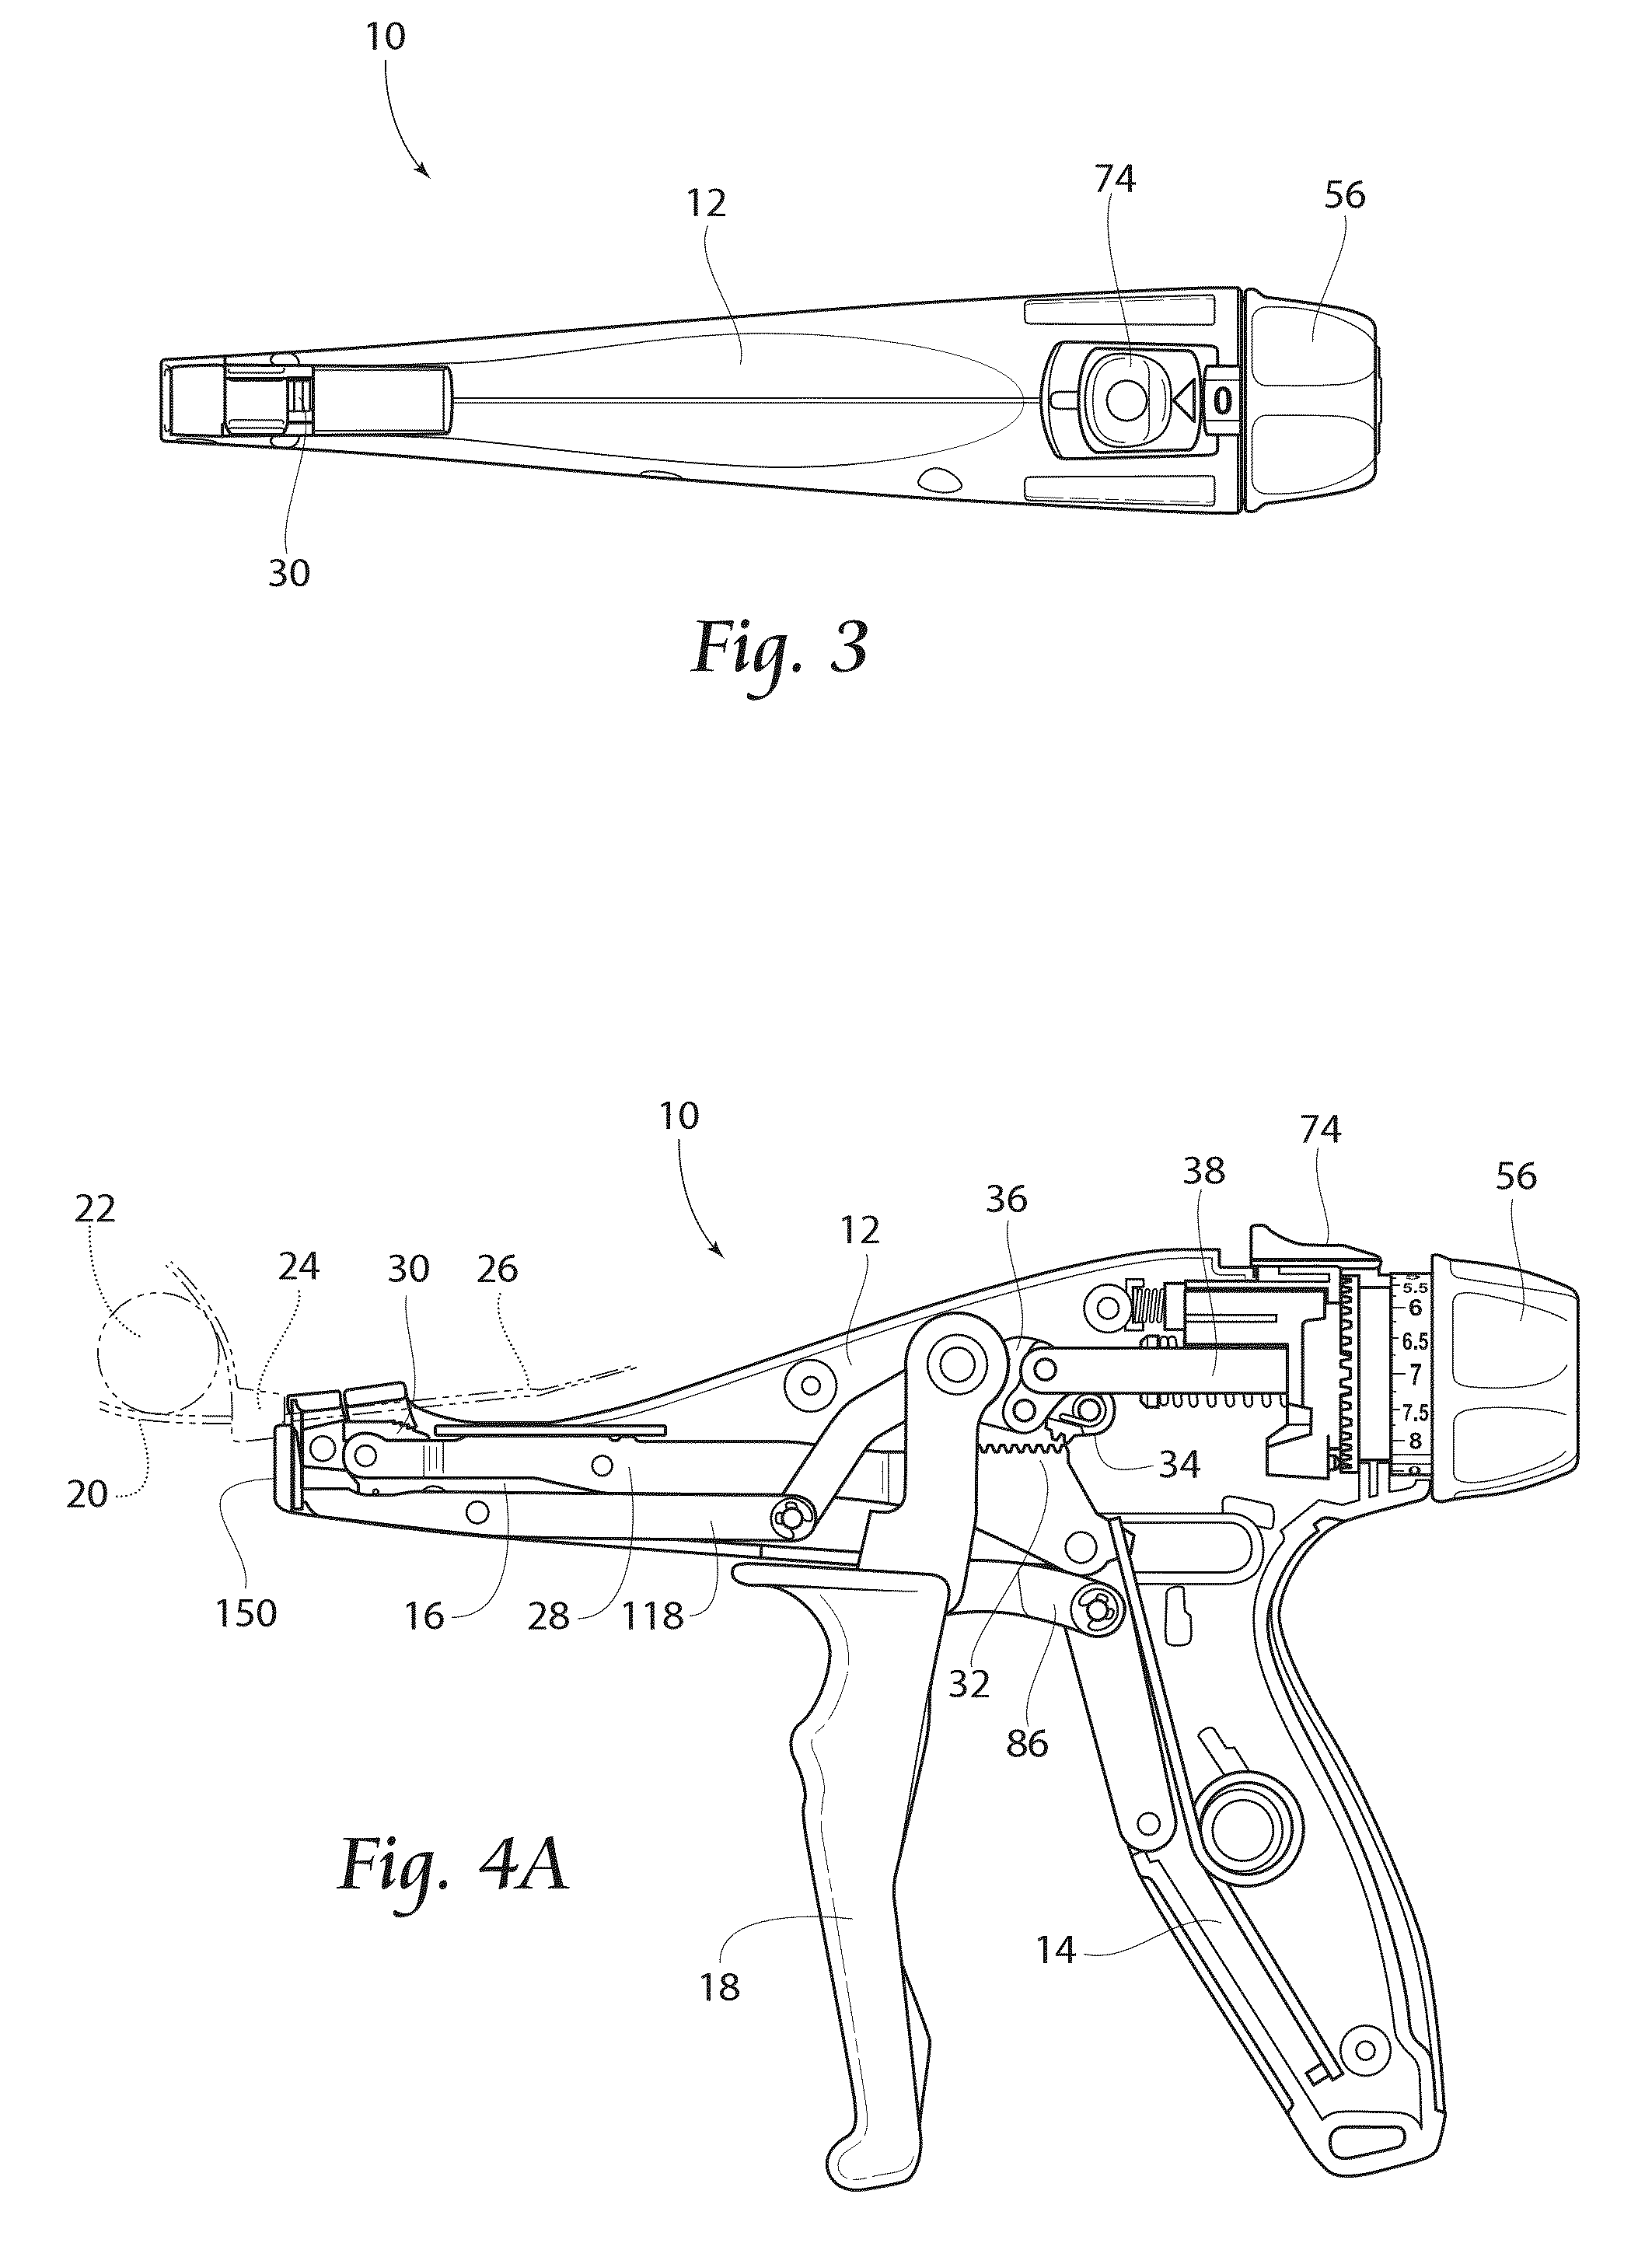 Cable tie tensioning and cut-off tool